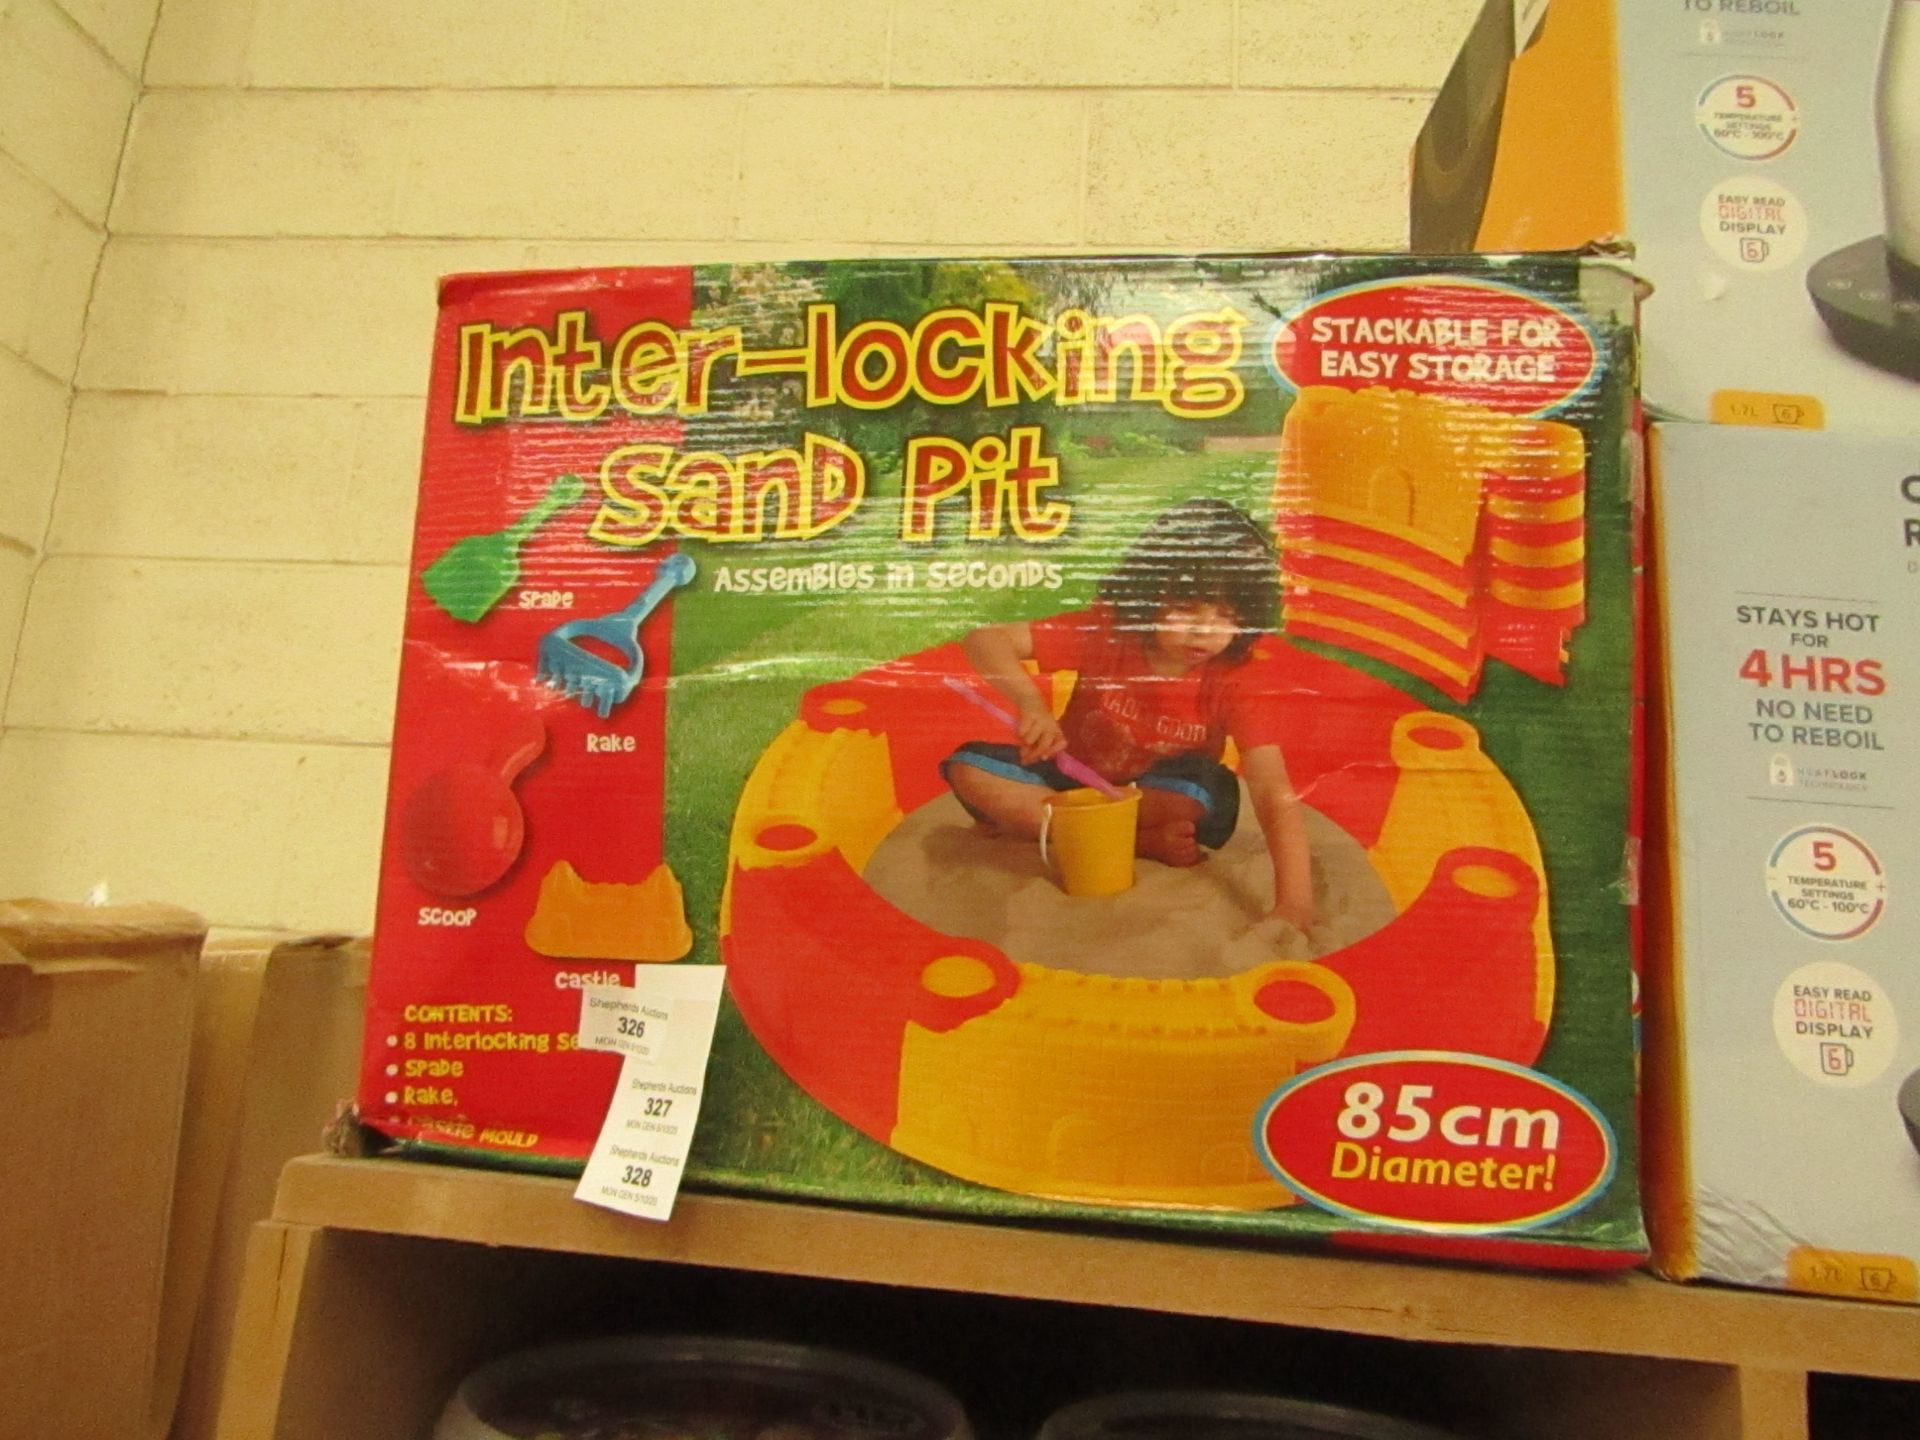 1 x Inter-locking Sand Pit 85cm (assembles in seconds) packaged unchecked (packaging may be